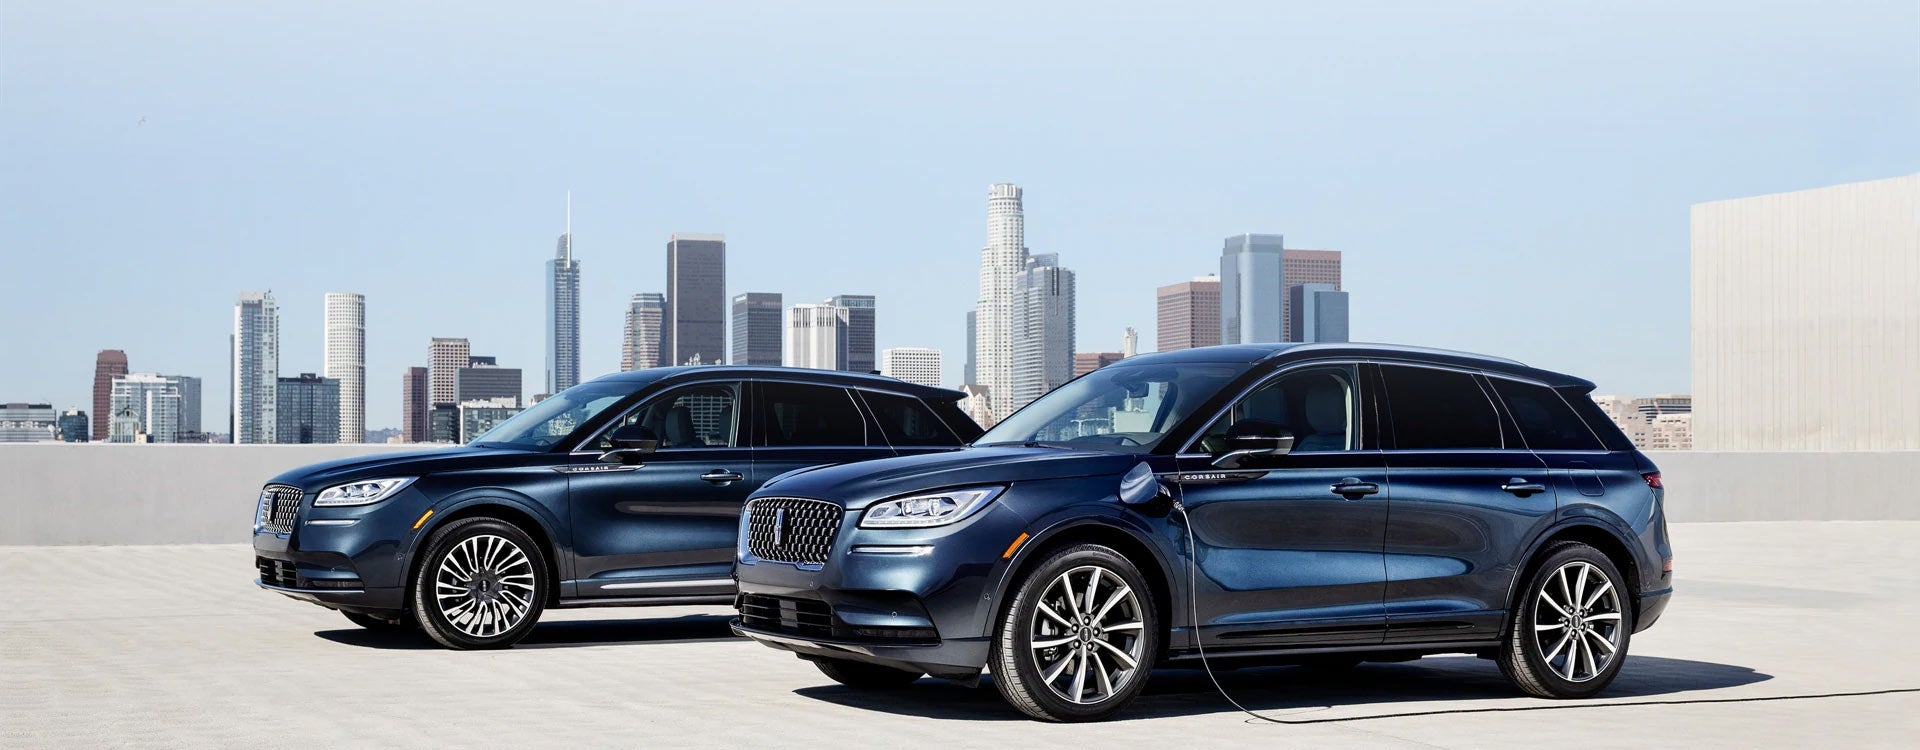 A Lincoln Corsair® Grand Touring SUV and a Lincoln Corsair Reserve model are parked next to each other on a rooftop